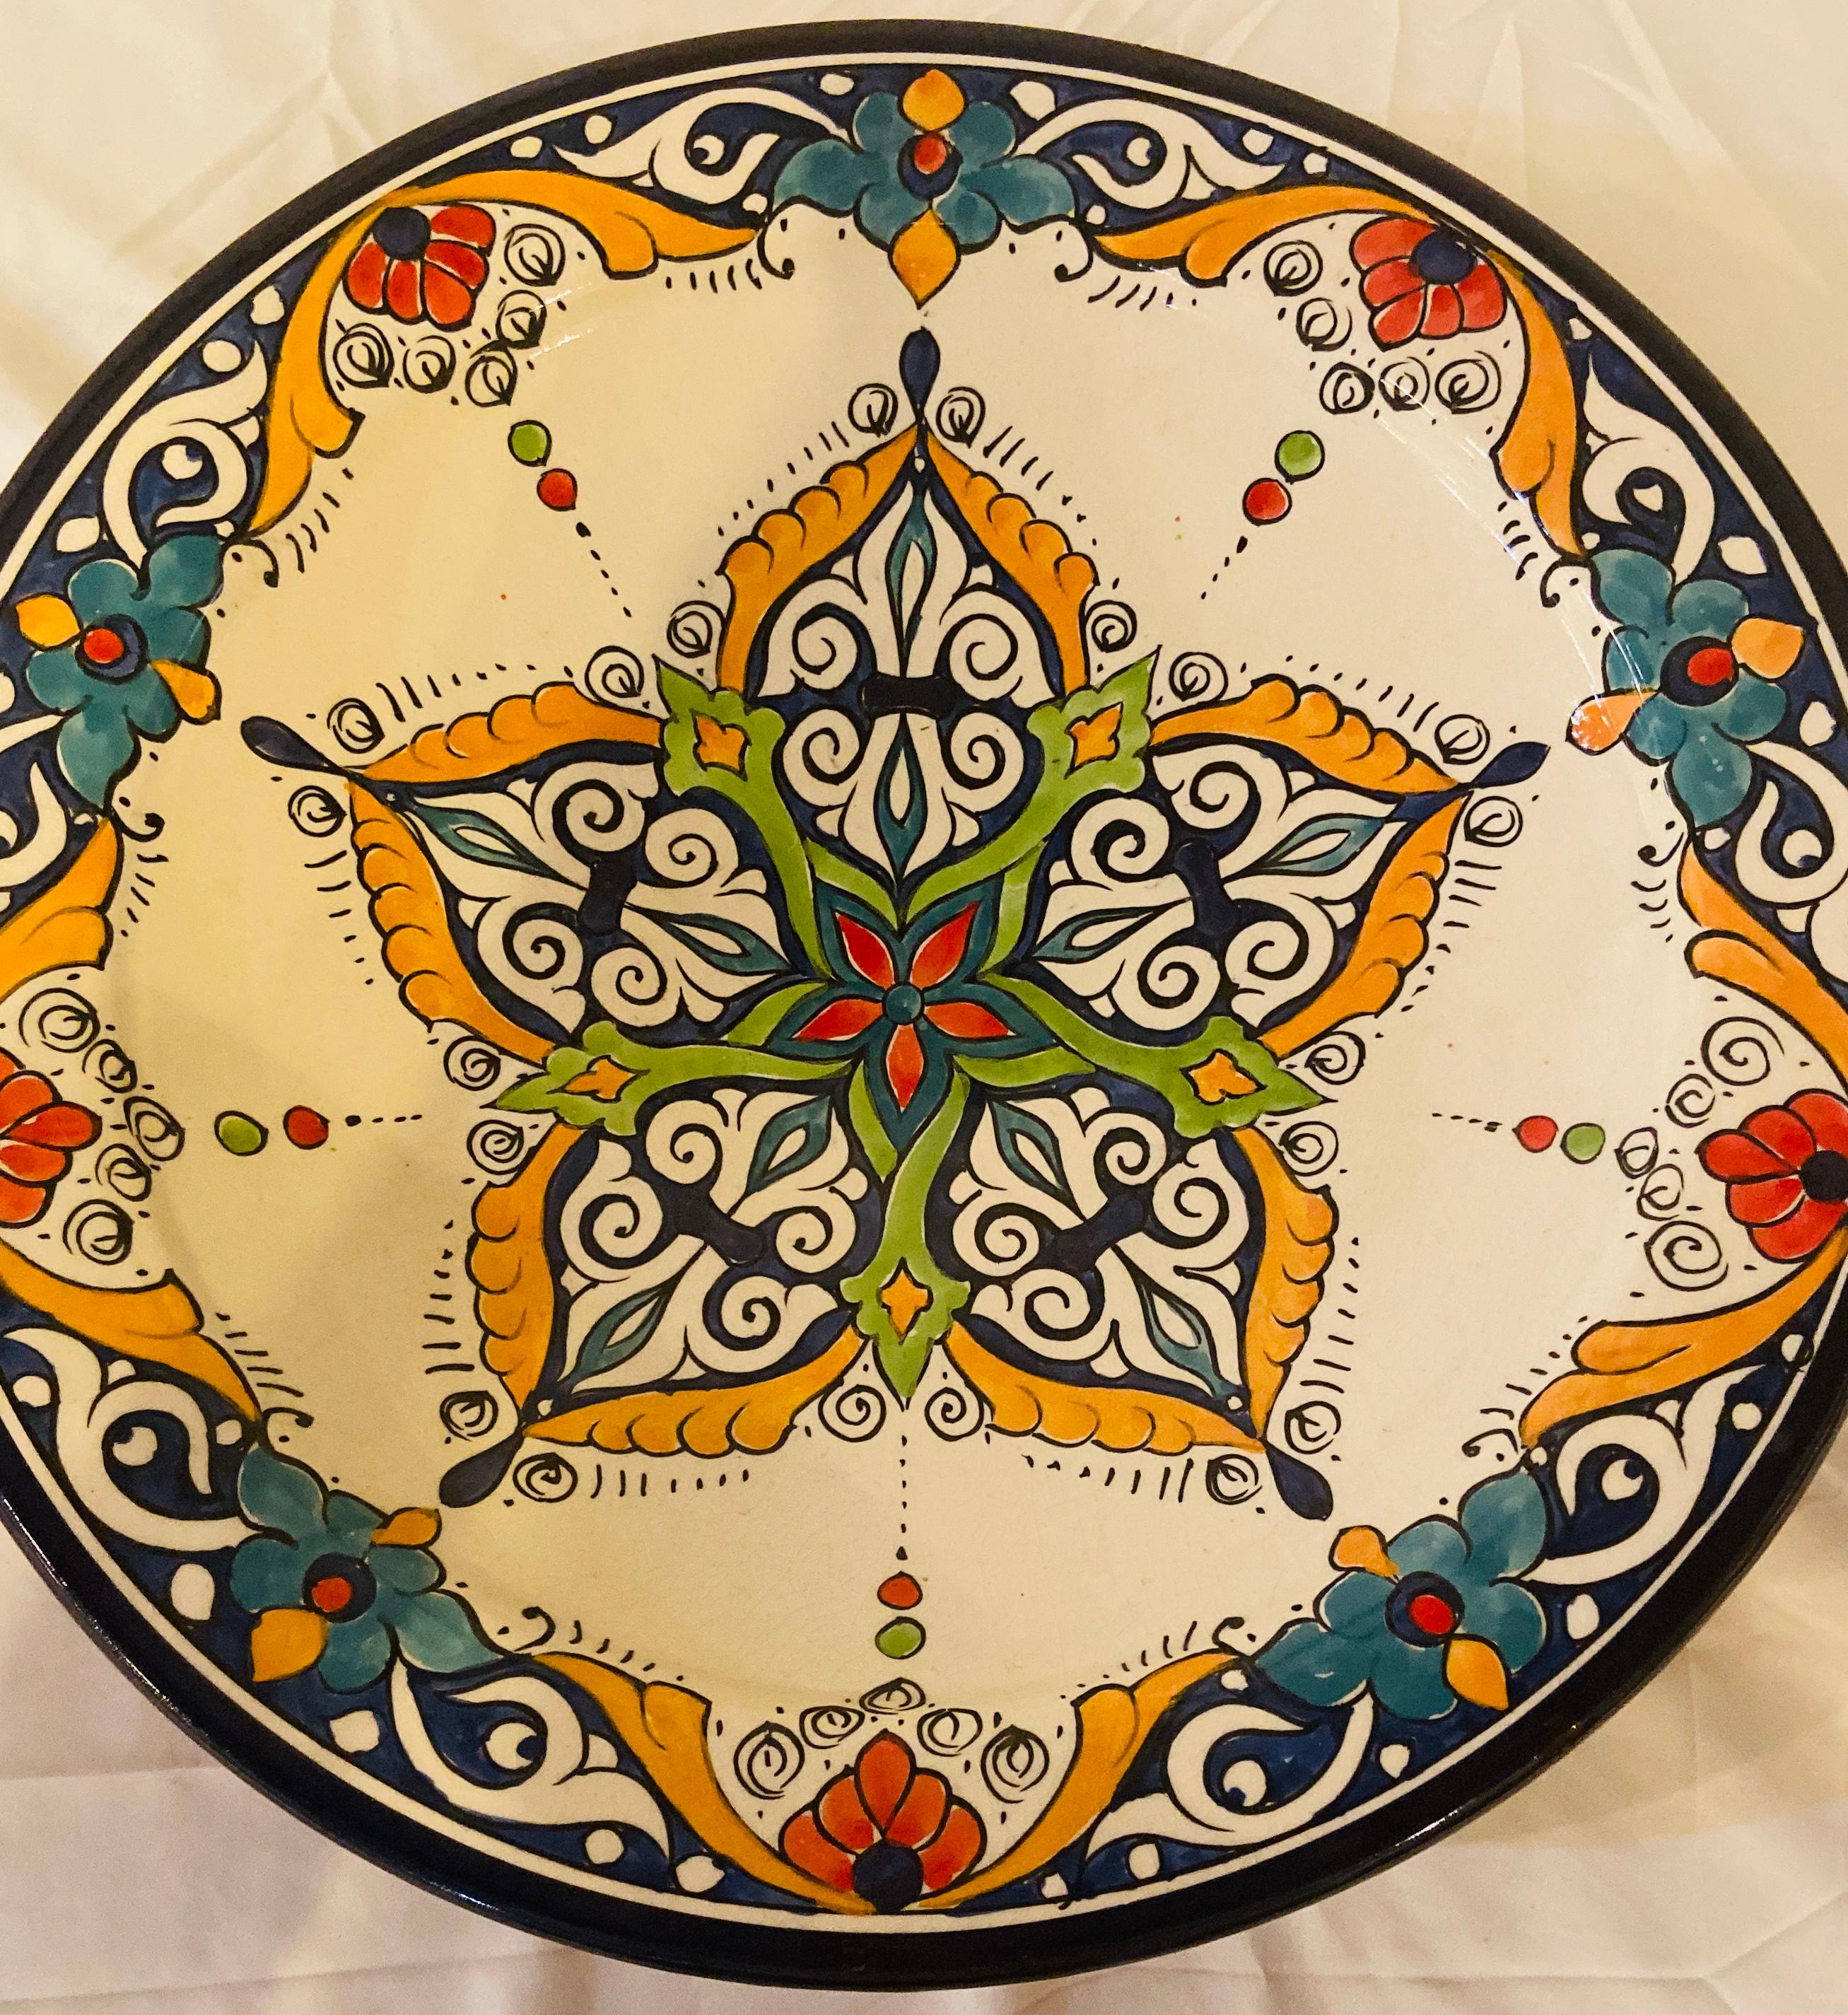 With a delightful floral and arabesque design hand painted in multiple colors in blue, yellow and red. This gorgeous, large-size ceramic dinner plate possesses a truly exotic look. Handcrafted in the bustling workshops of master artisans in the